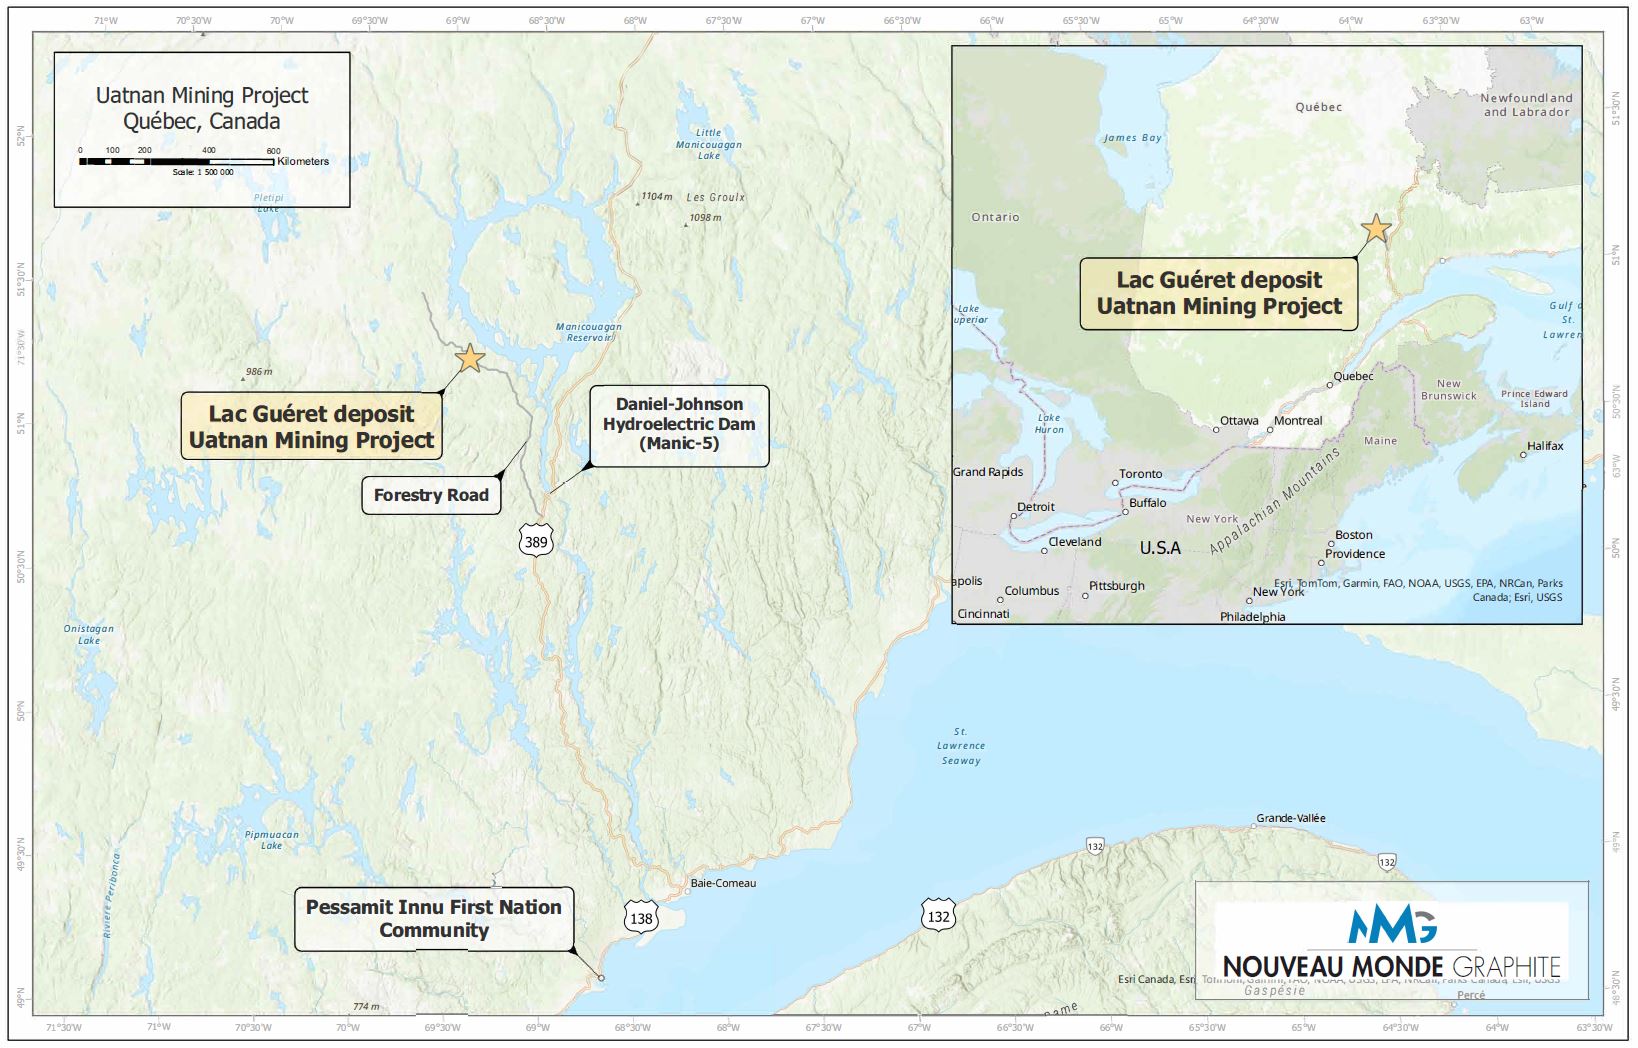 NMG's Uatnan projects on the Quebec map.